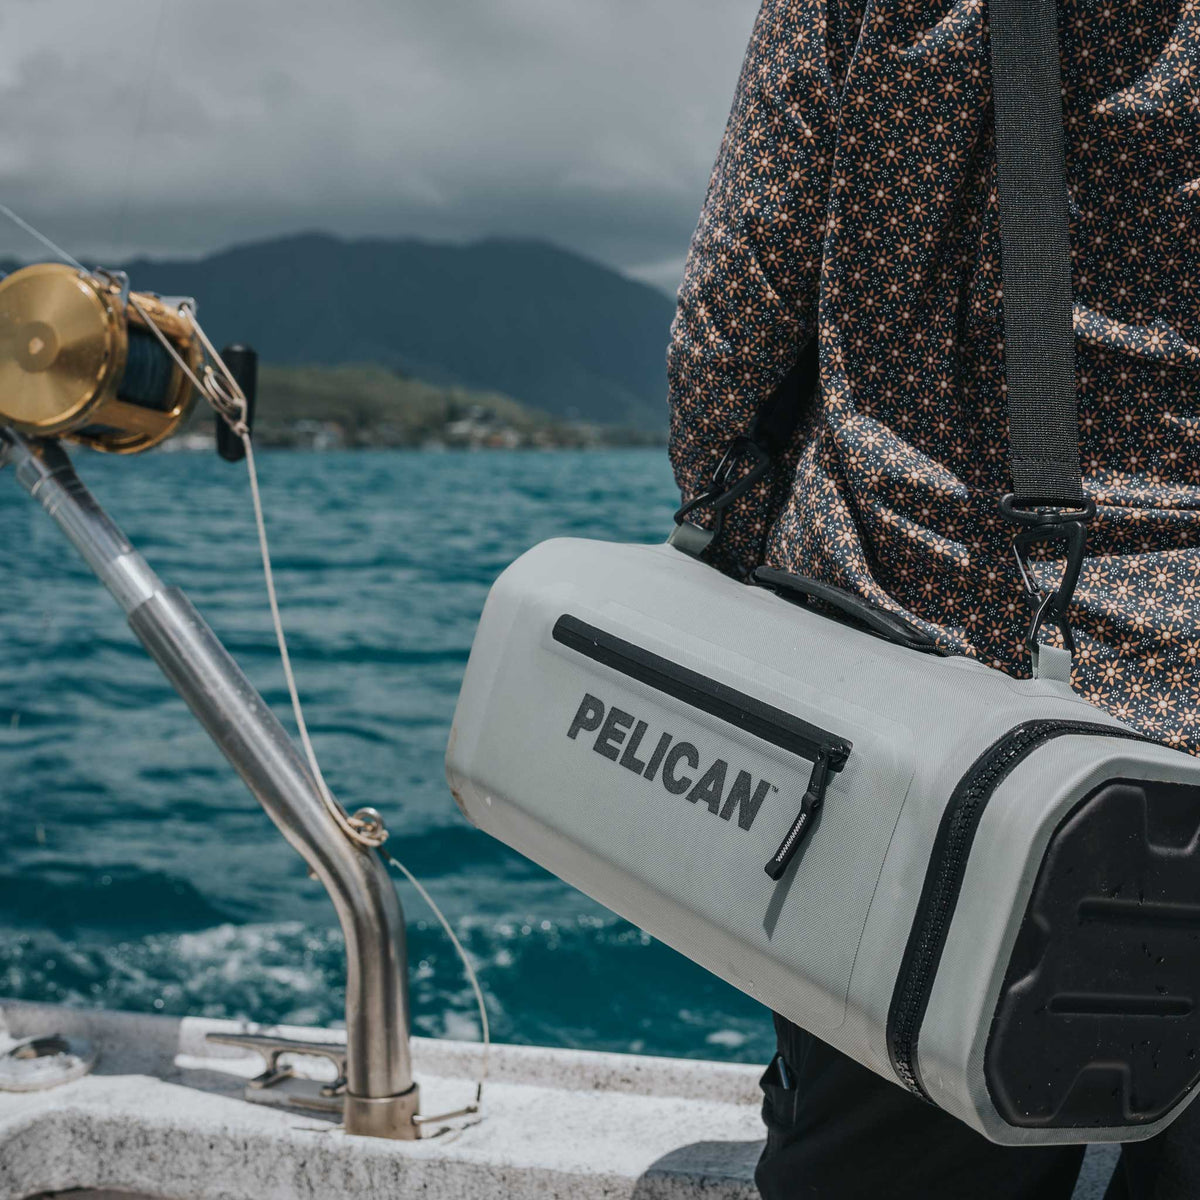 Pelican™ Dayventure Sling Soft Cooler be used on the ocean with the strap